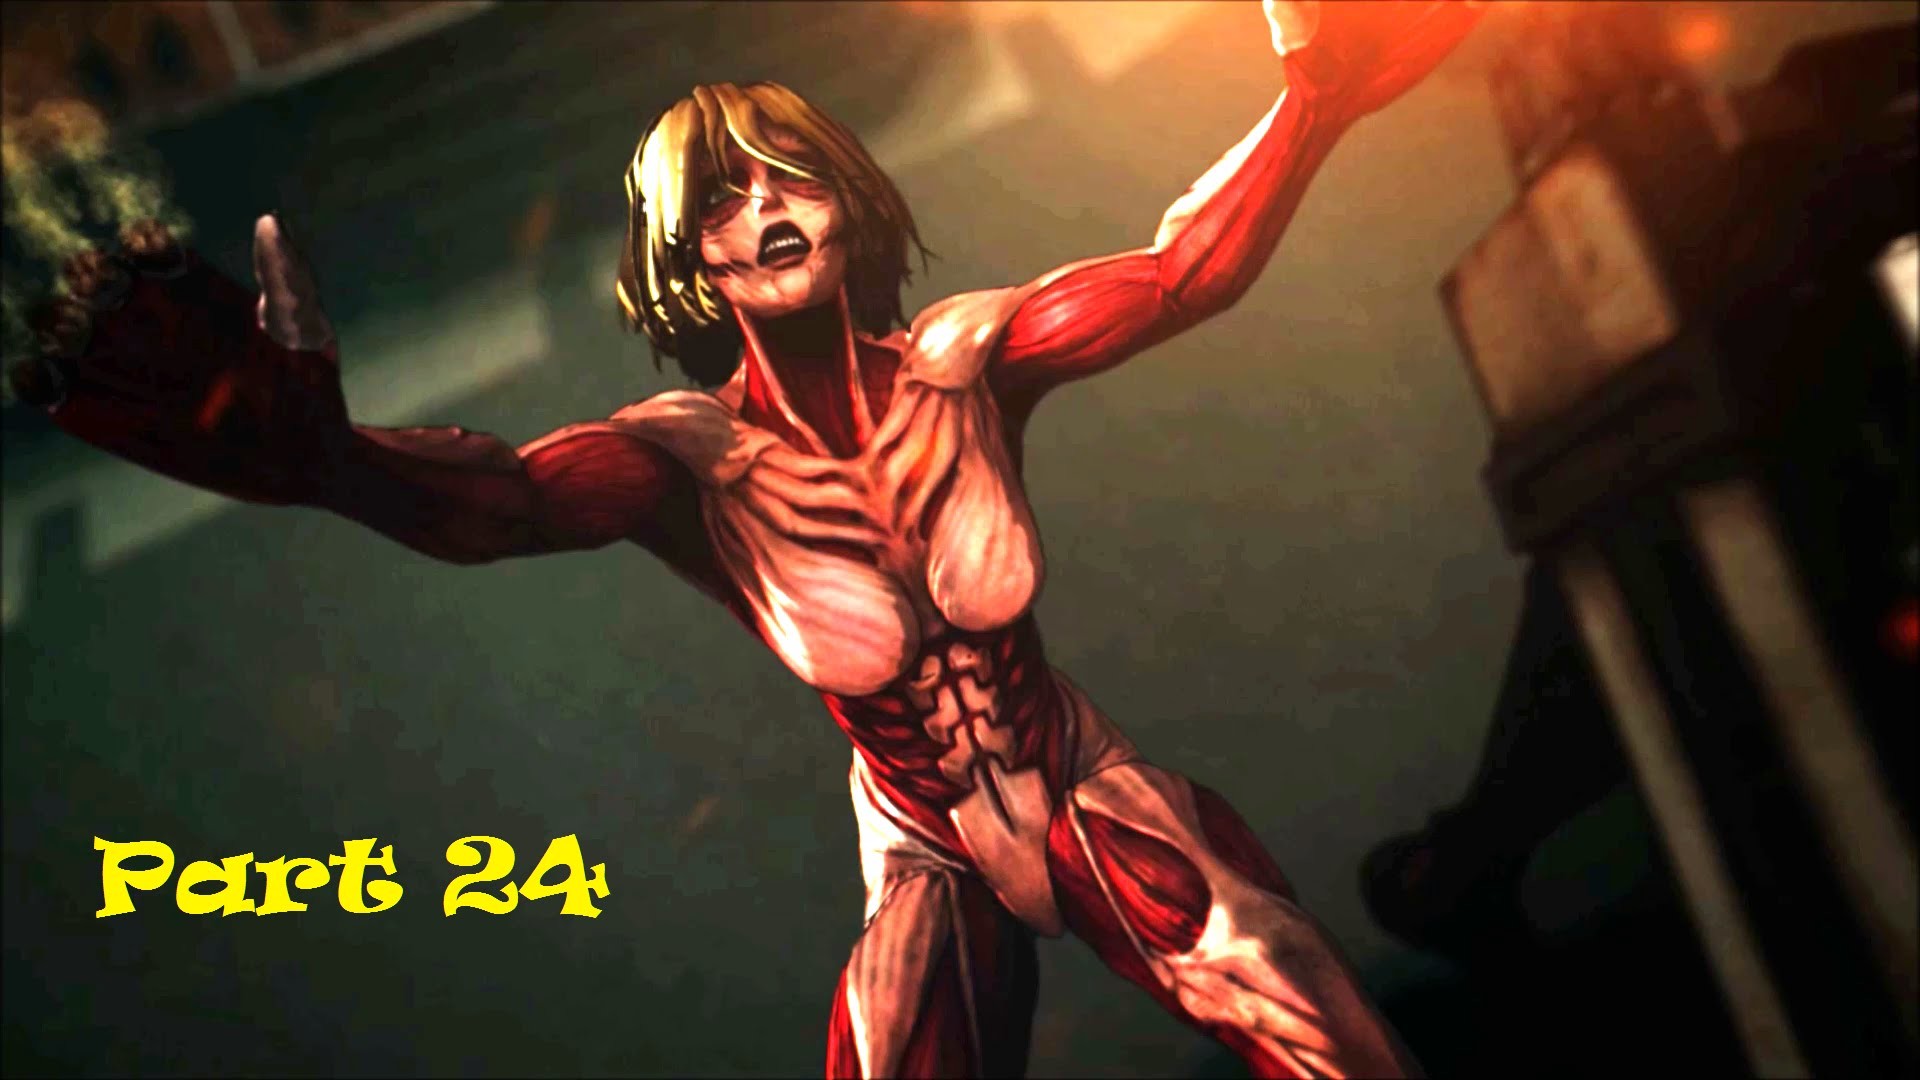 1920x1080 Eren vs Annie - Attack on Titan - Wings of Freedom - Soldiers Dance -  YouTube